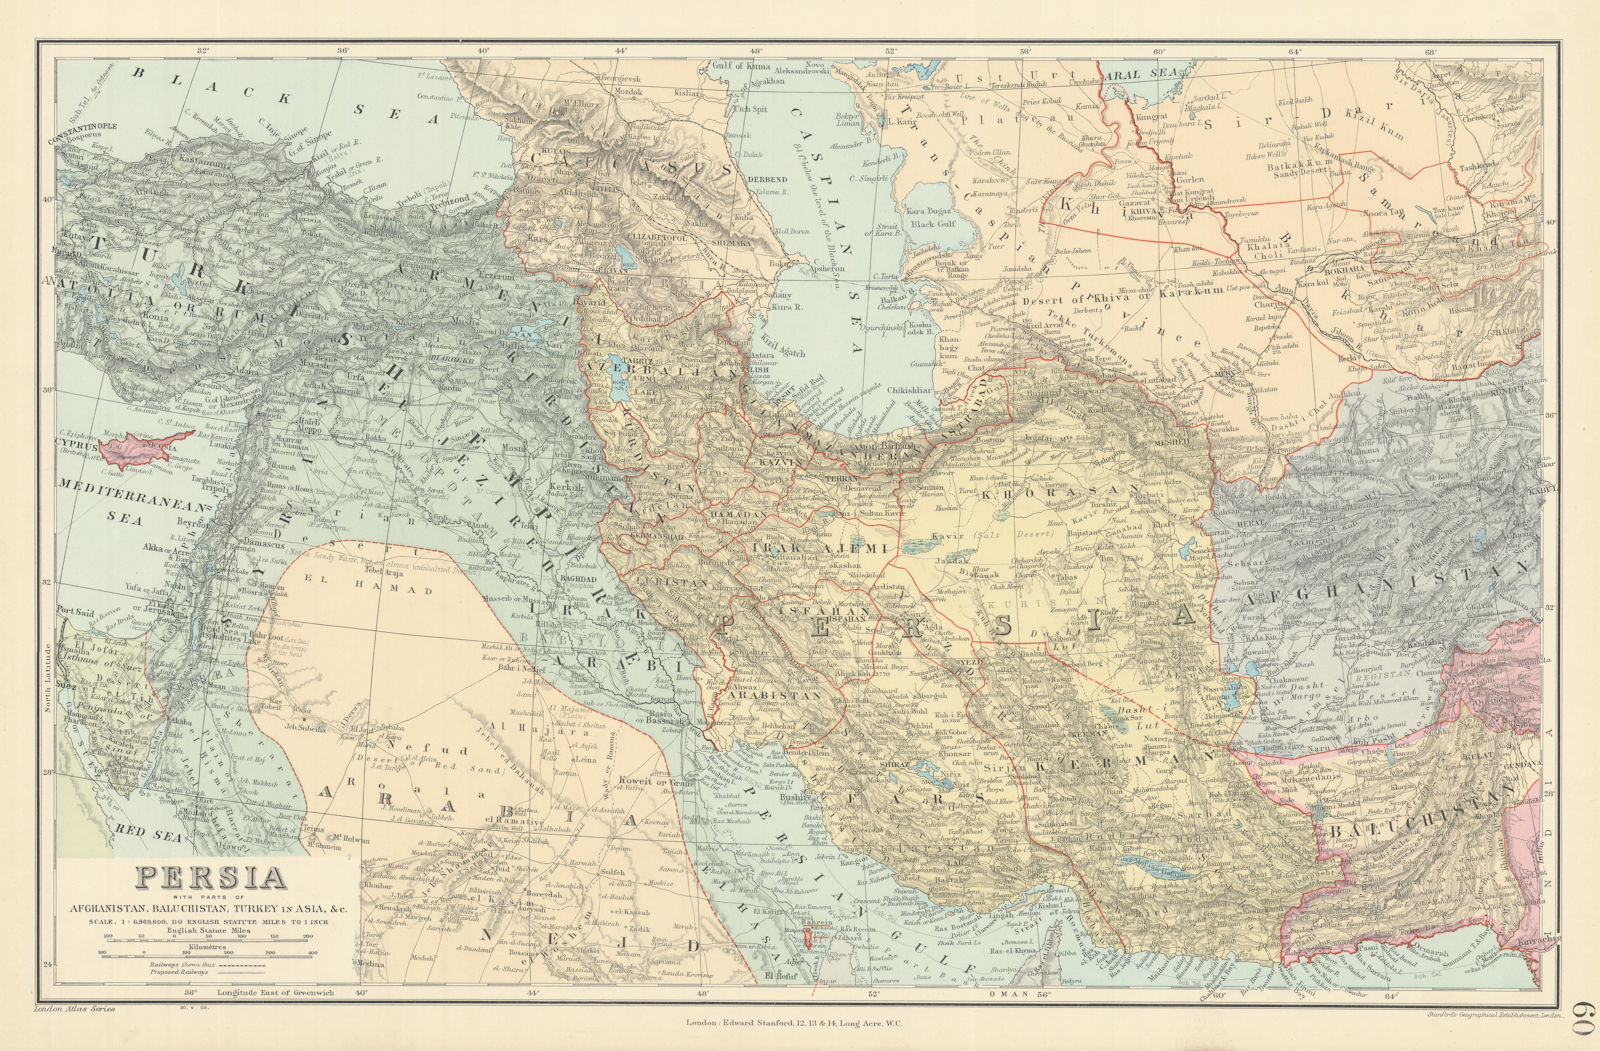 Persia, Afghanistan, Baluchistan, Turkey. South west Asia. STANFORD 1904 map